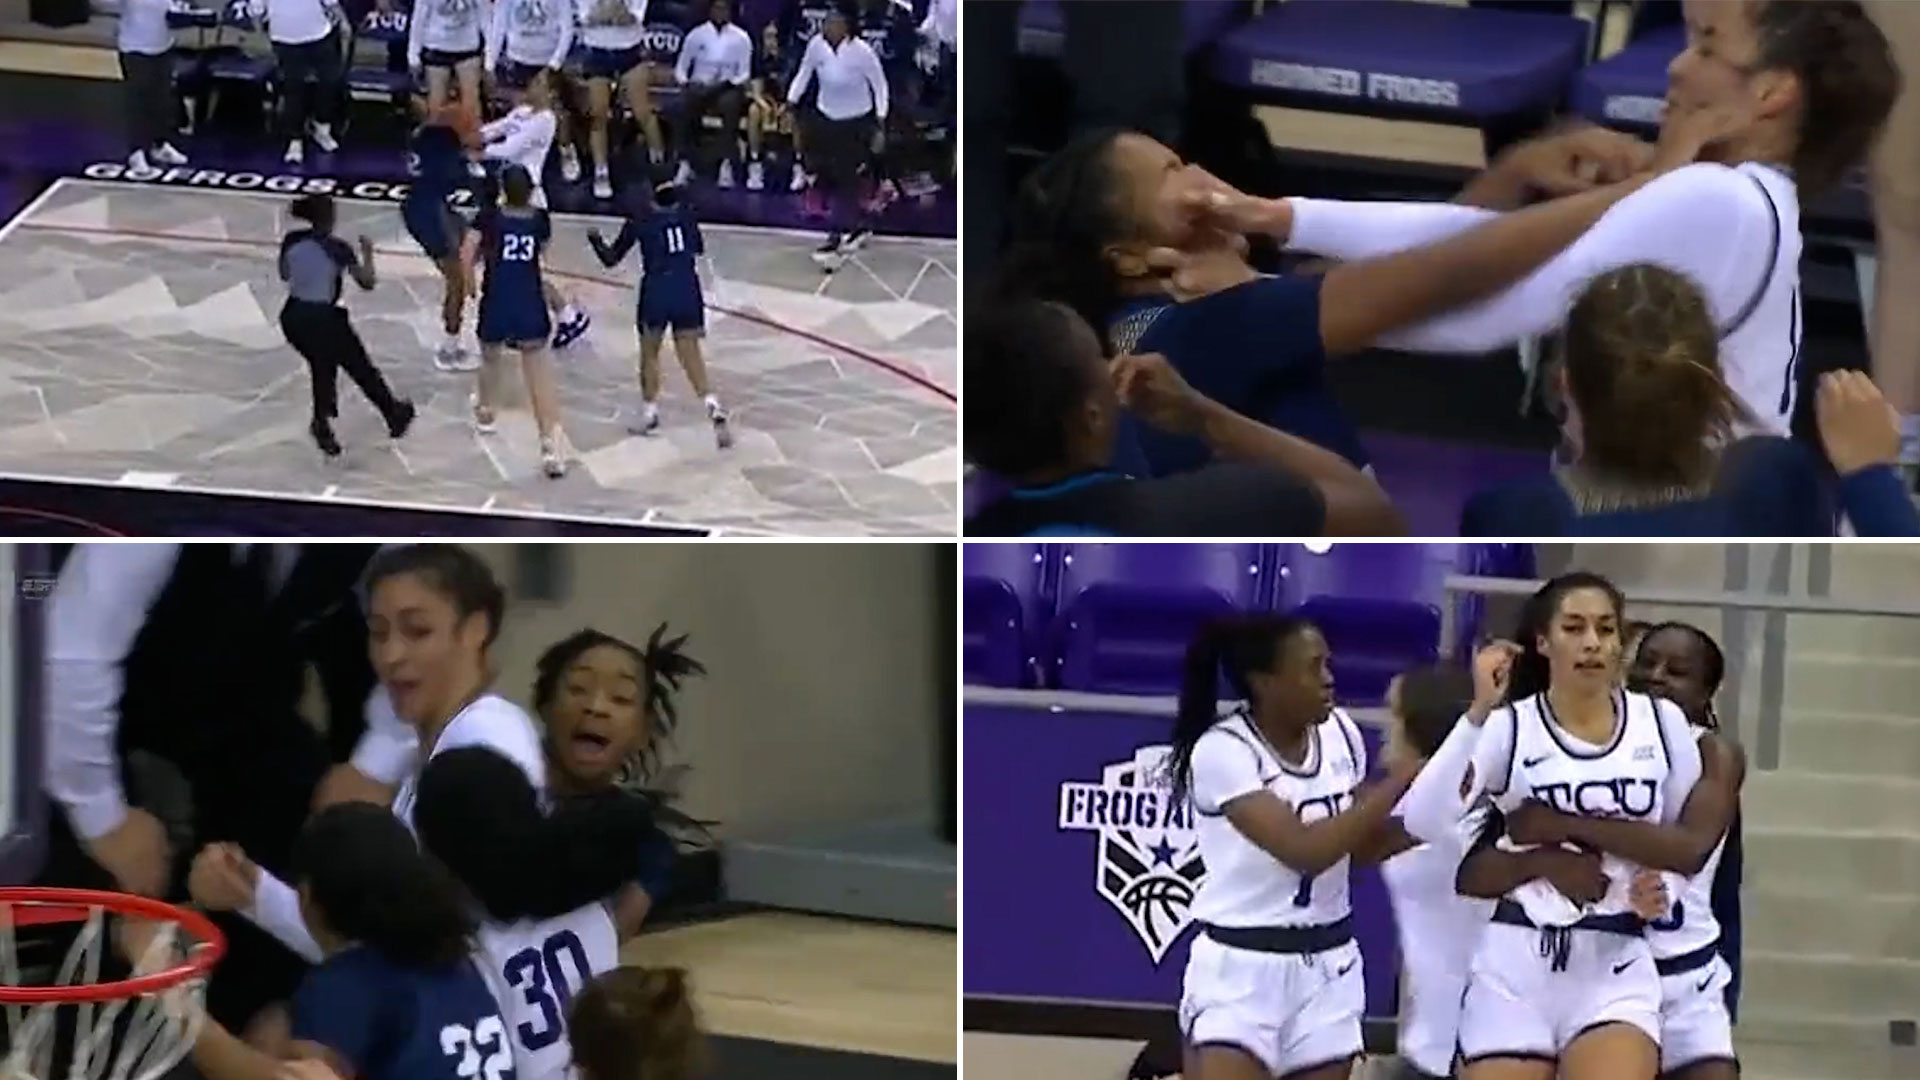 The sequence of the scandal in the university basketball game between the teams of Texas and Washington